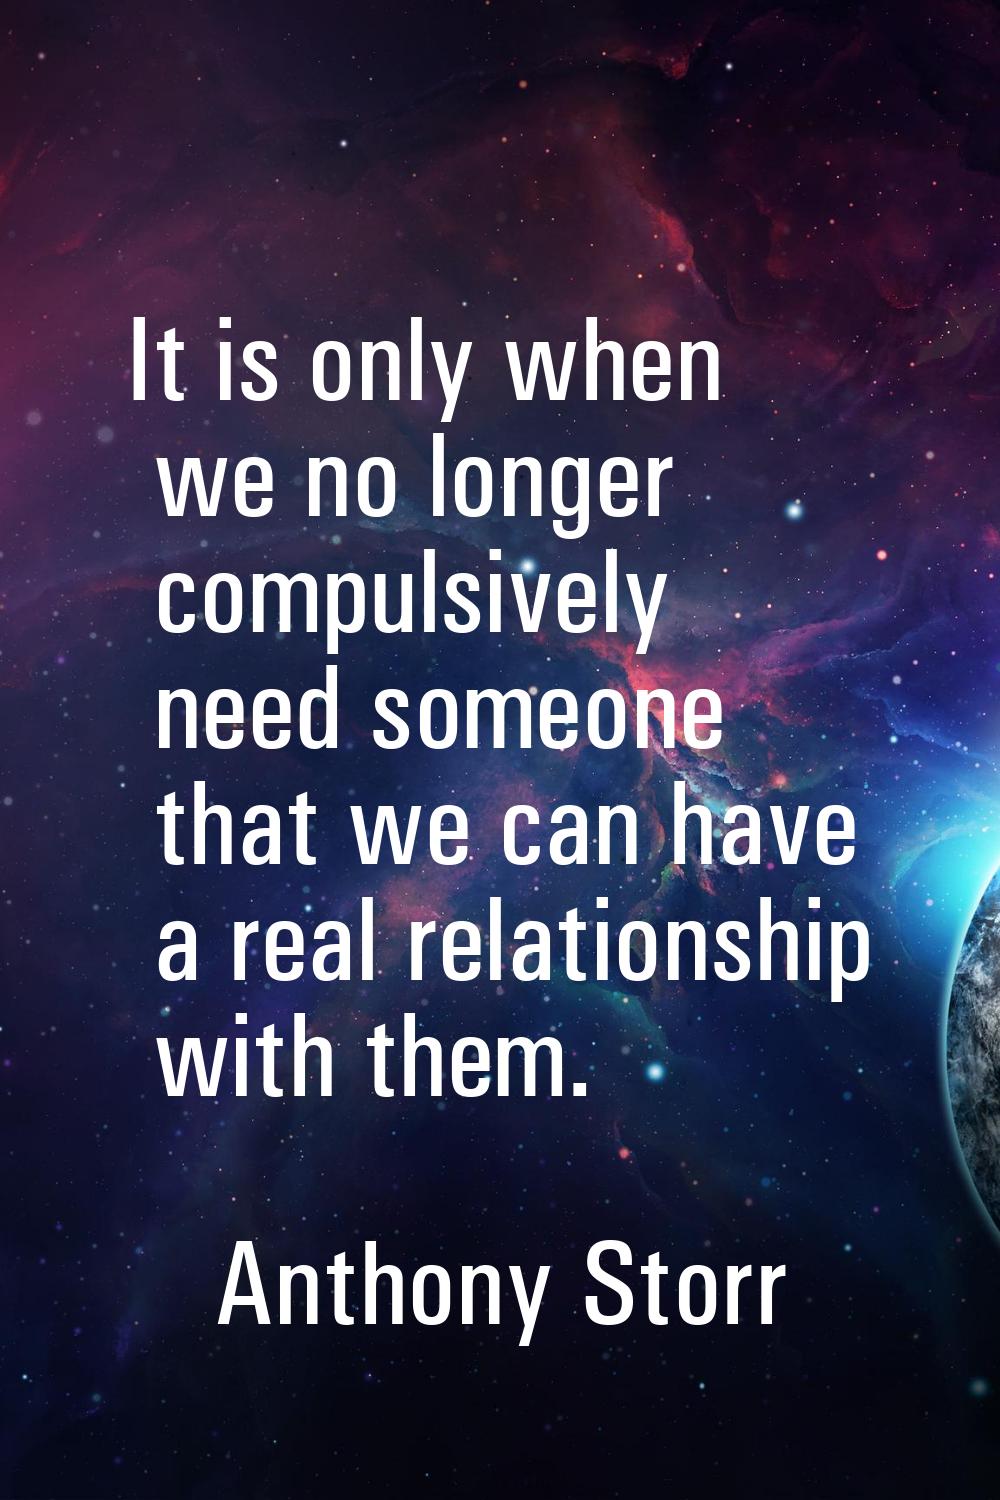 It is only when we no longer compulsively need someone that we can have a real relationship with th